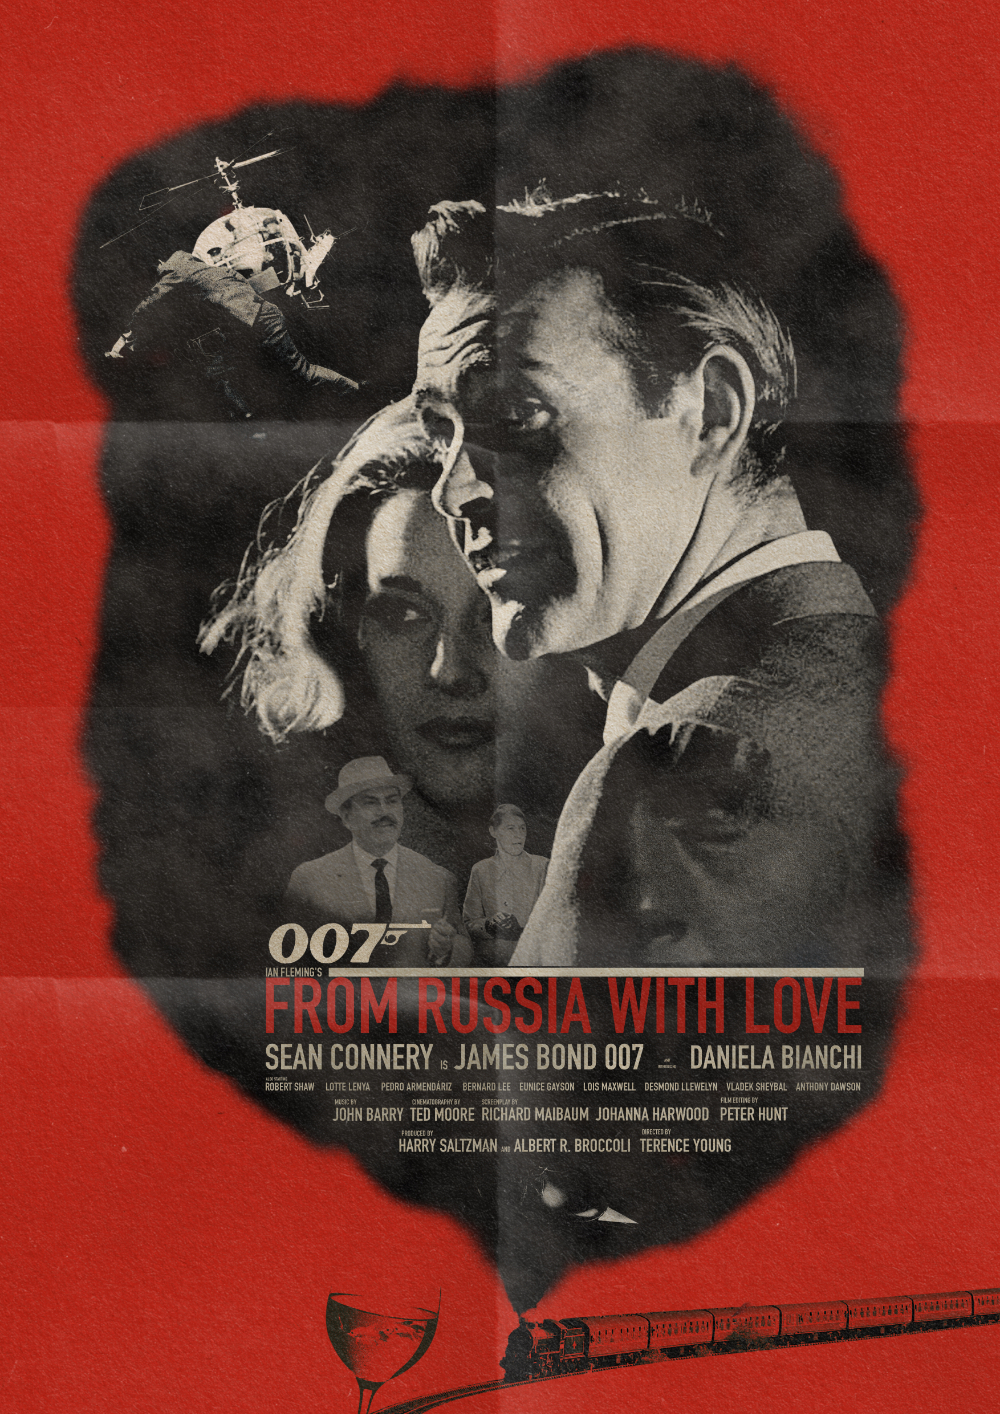 FRom Russia With Love – James Bond 007